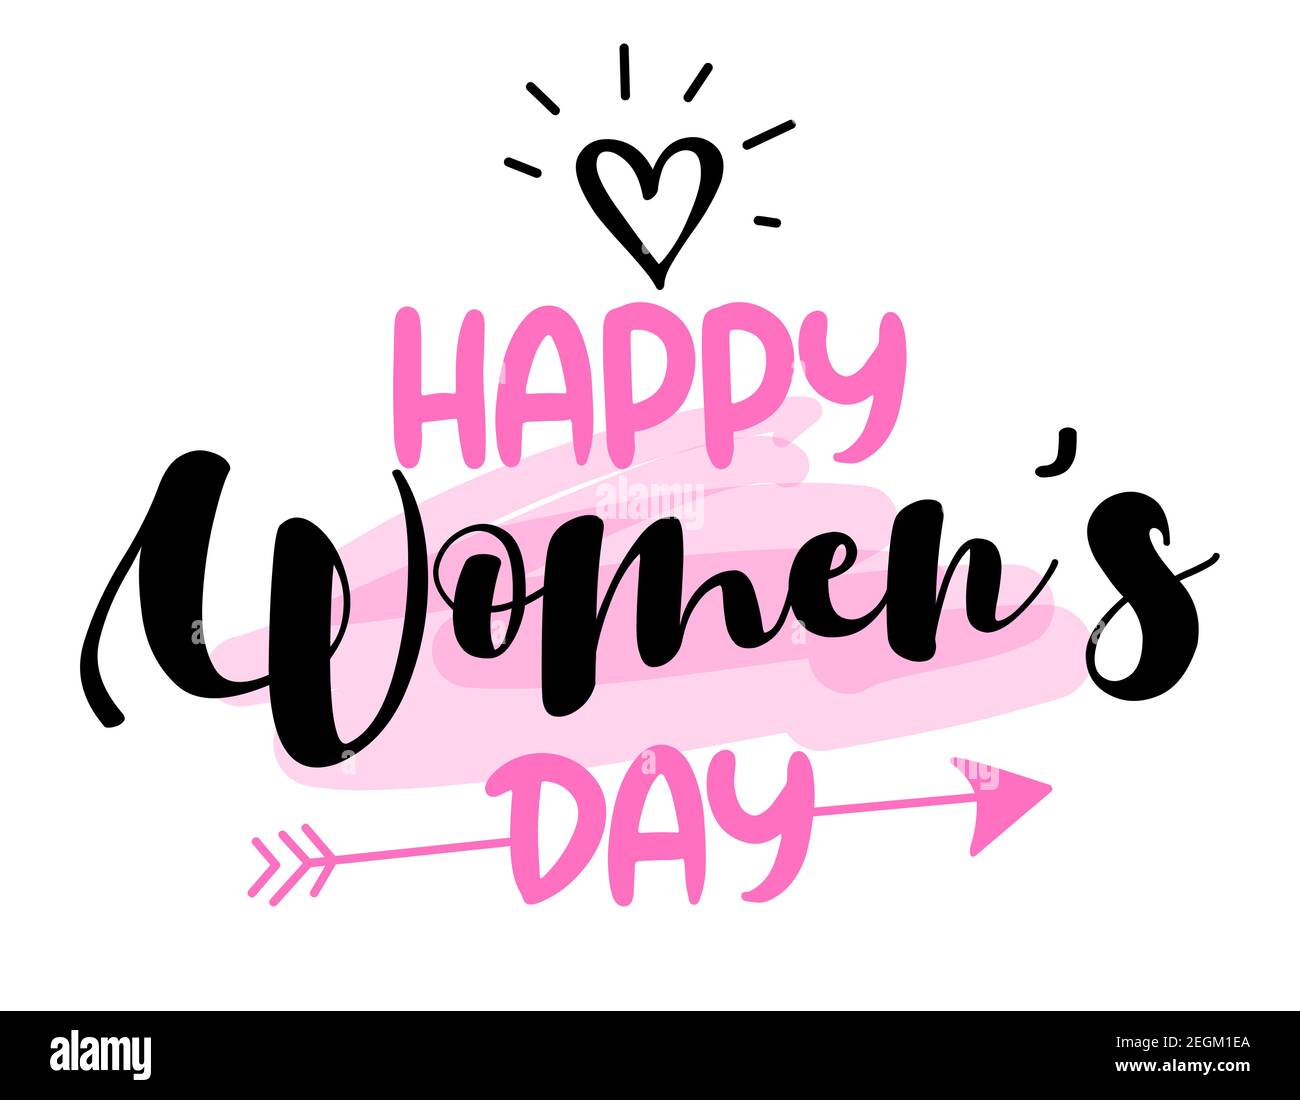 Happy Women's Day - International Womens Day greeting card. Calligraphic handwritten phrase and hand drawn flowers. Handmade calligraphy illustration. Stock Vector